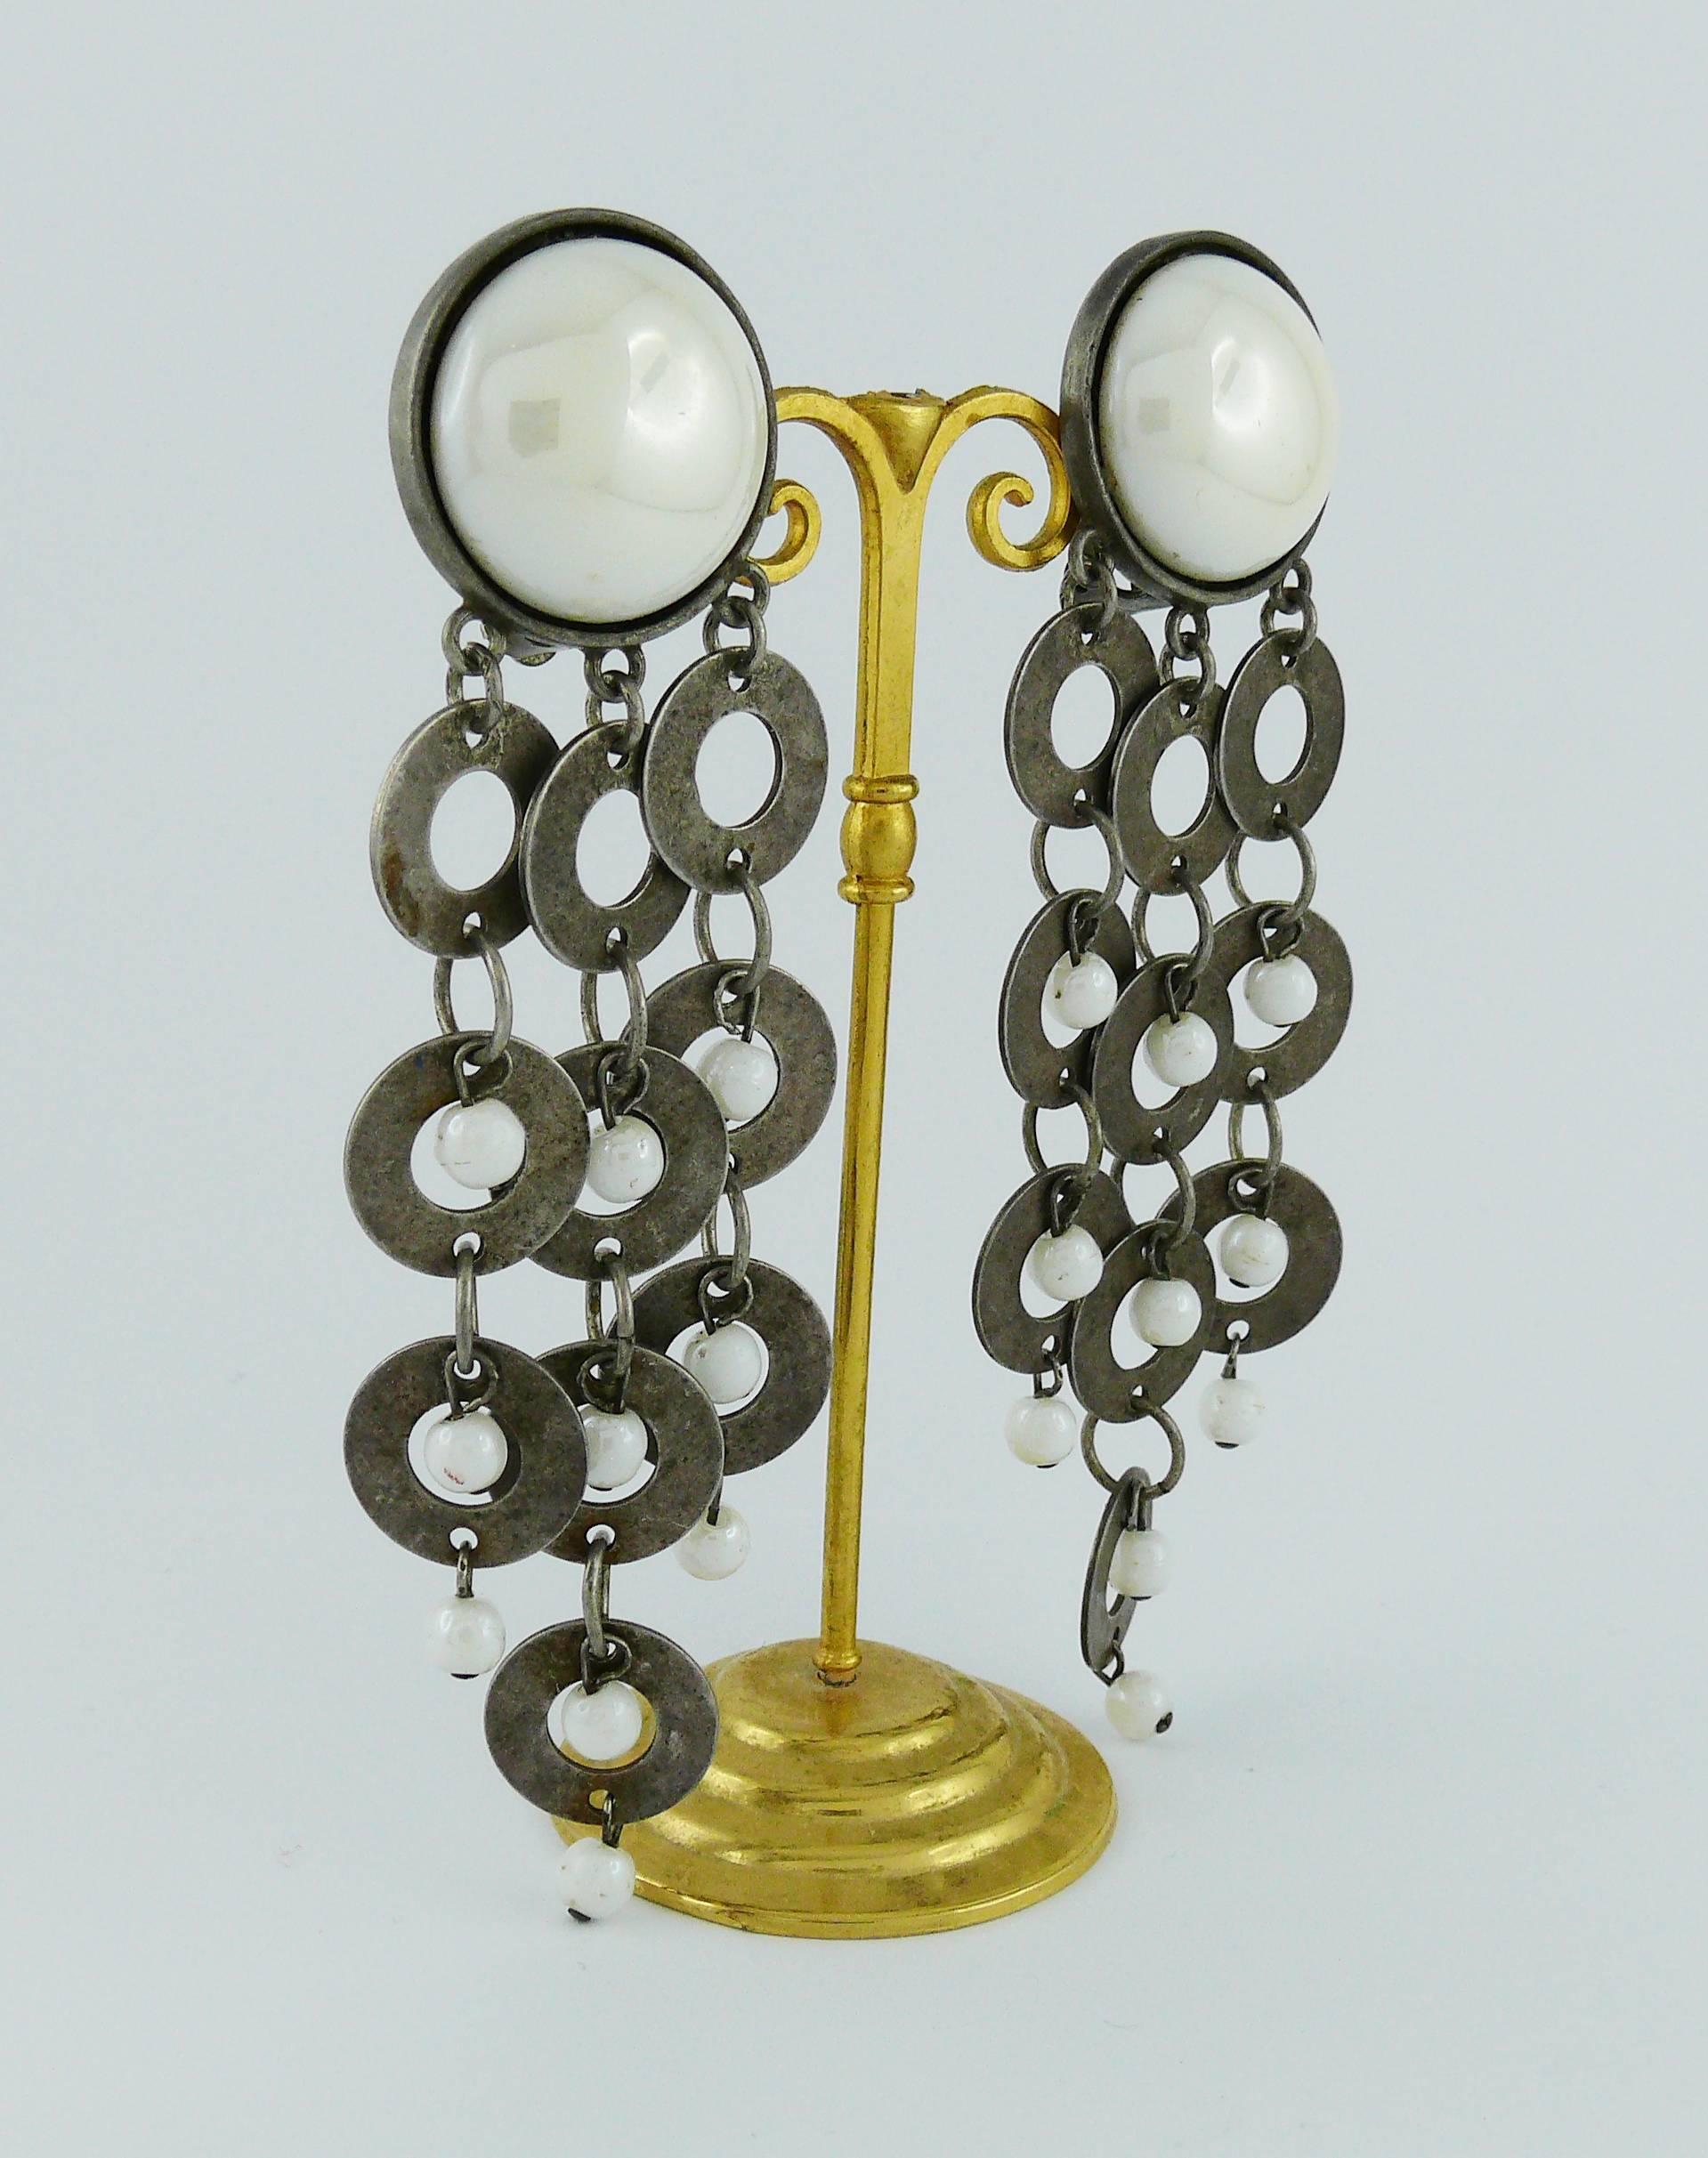 PACO RABANNE vintage dangling earrings (clip-on) featuring metal circles embellished with white glass beads and cabochons.

Marked PACO RABANNE Paris.

Indicative measurements : length approx. 10.5 cm (4.13 inches).

JEWELRY CONDITION CHART
- New or